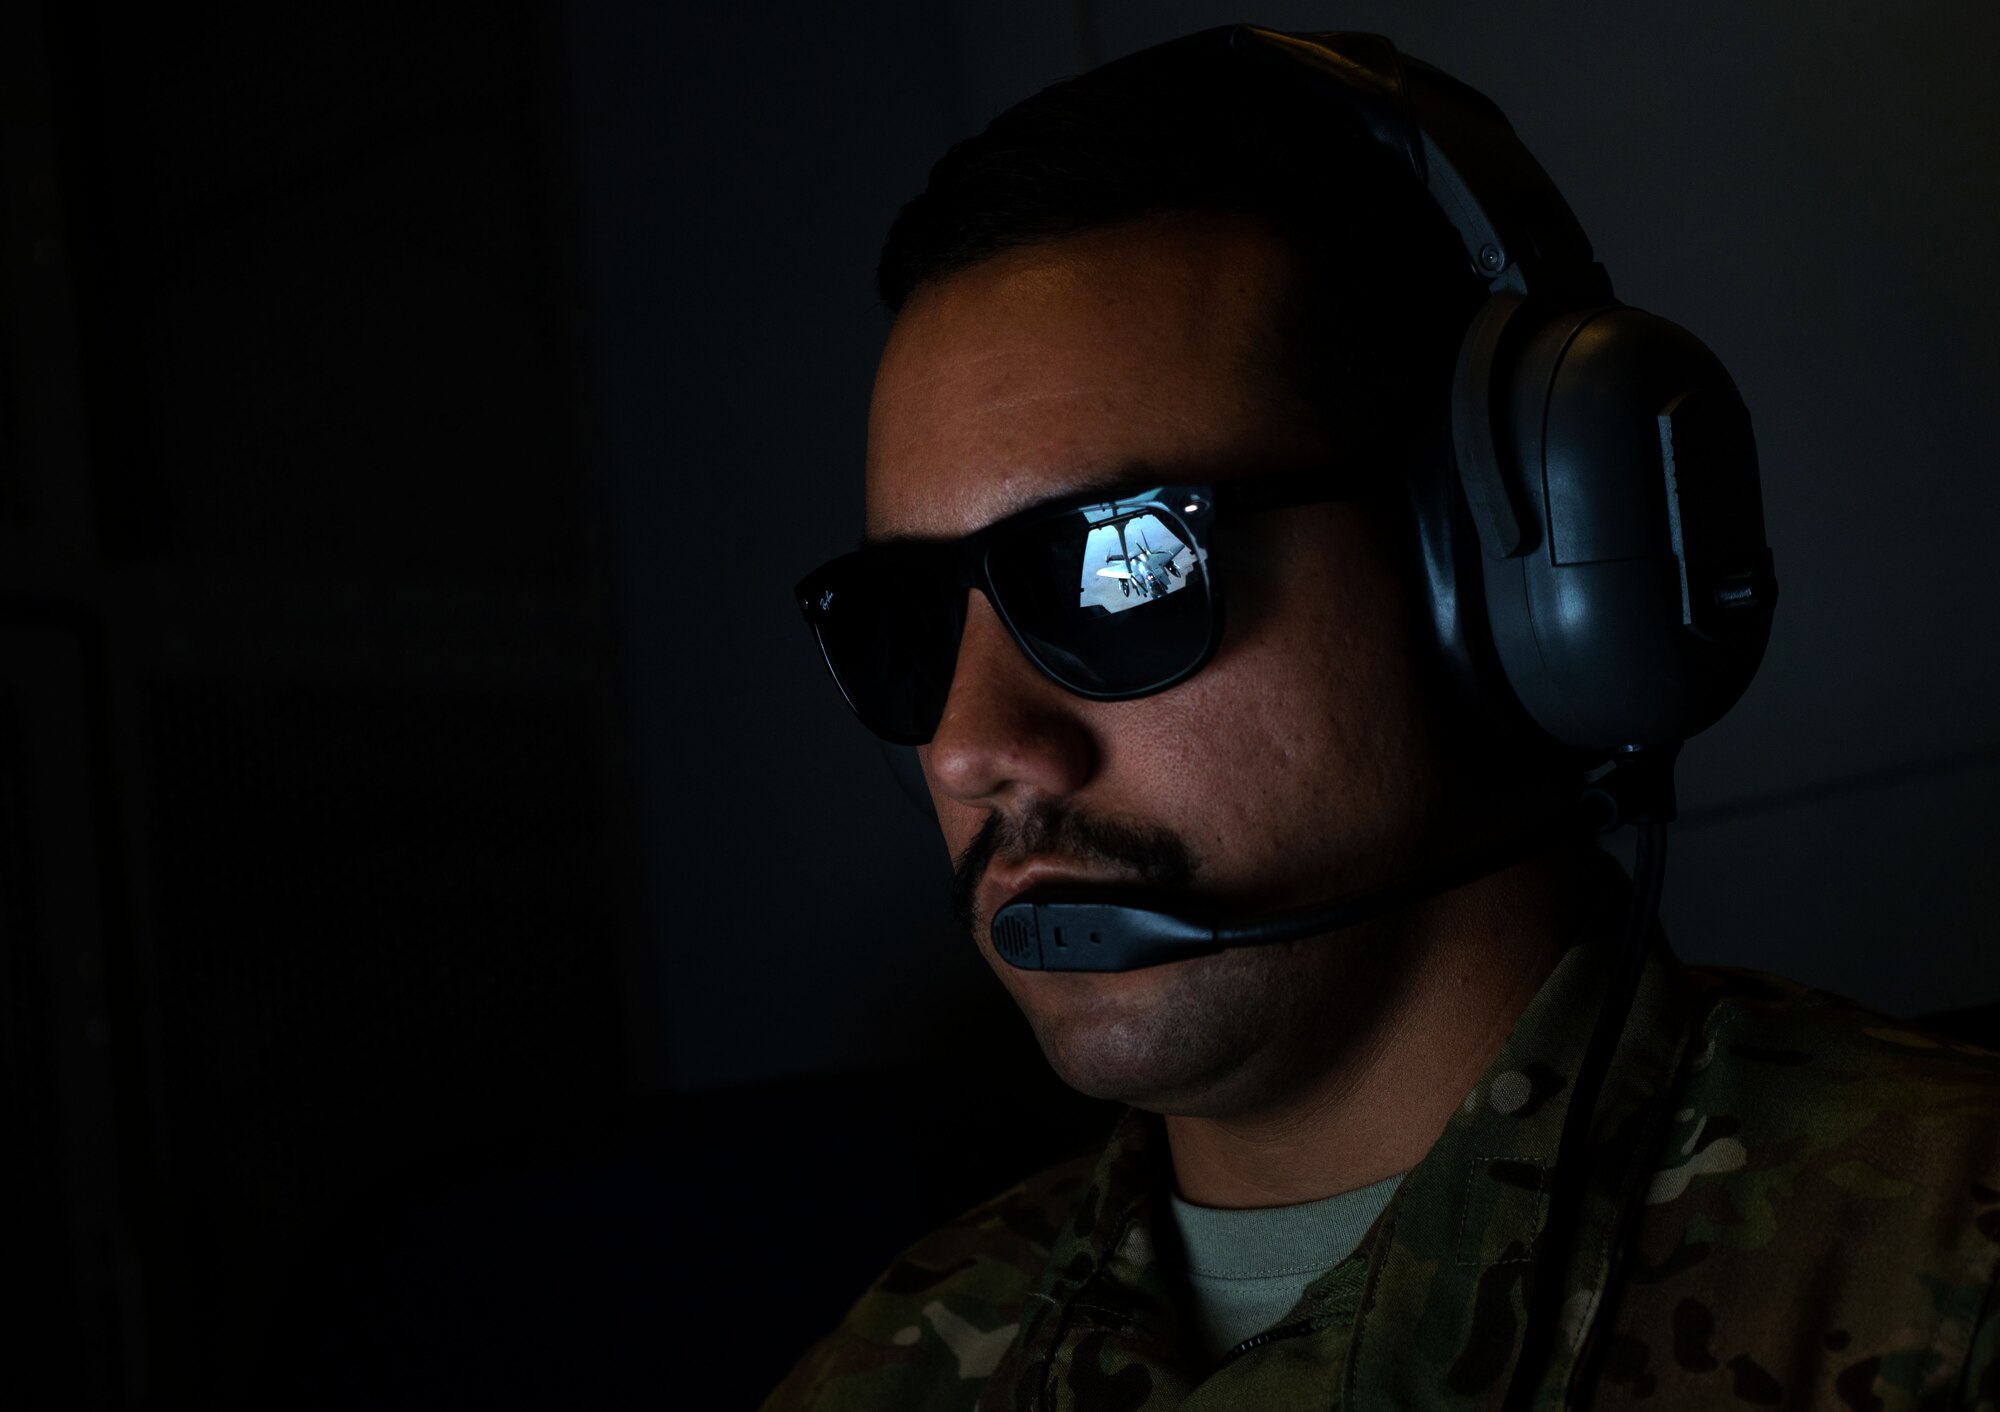 U.S. Air Force Staff Sgt. Michael, a KC-10 Extender boom operator deployed in support of Operation Inherent Resolve, refuels an F-15E Strike Eagle near Mosul, Iraq, Nov. 20, 2016. Using either an advanced aerial refueling boom, or a hose and drogue centerline refueling system, the KC-10 can refuel a wide variety of U.S. and allied military aircraft within the same mission. (U.S. Air Force photo by Staff Sgt. R. Alex Durbin)